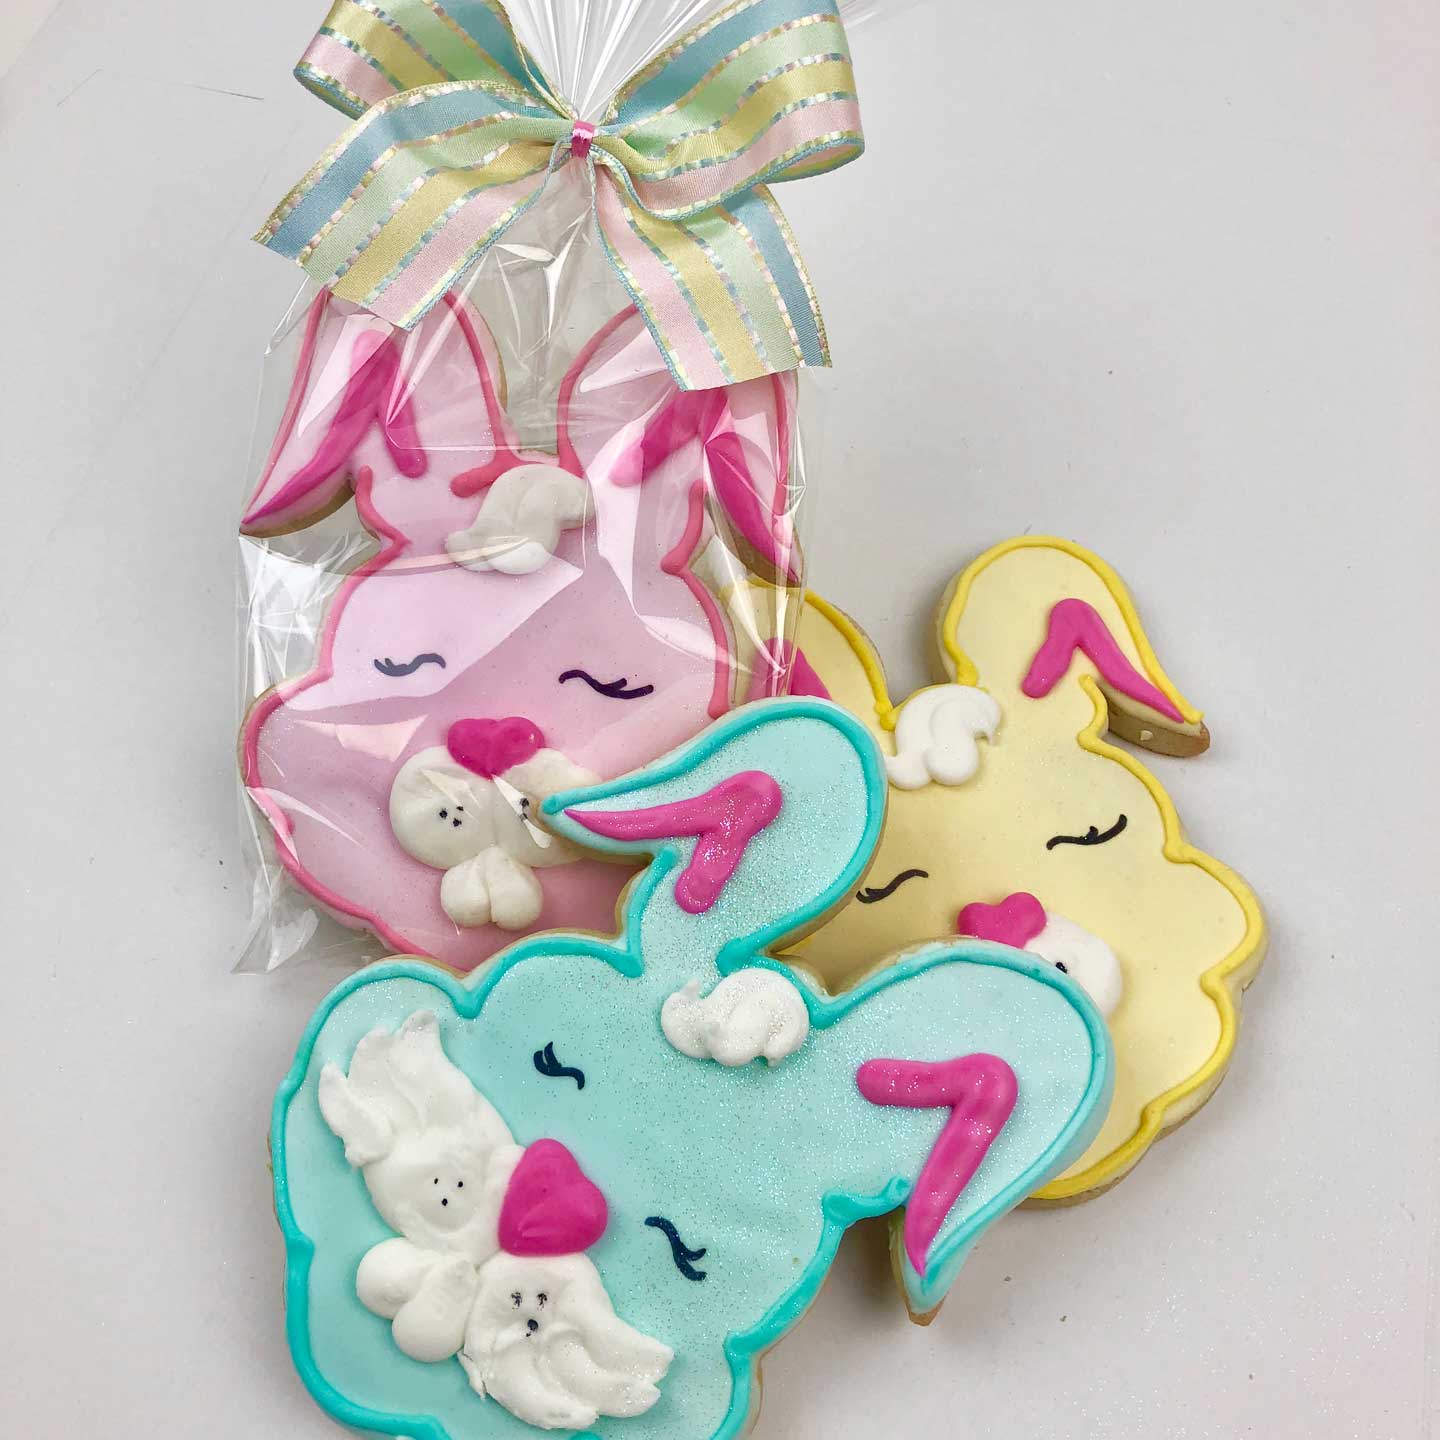 Pink, blue, and yellow Bunny Face Cookies. The Pink one is warped in cellophane with a ribbon